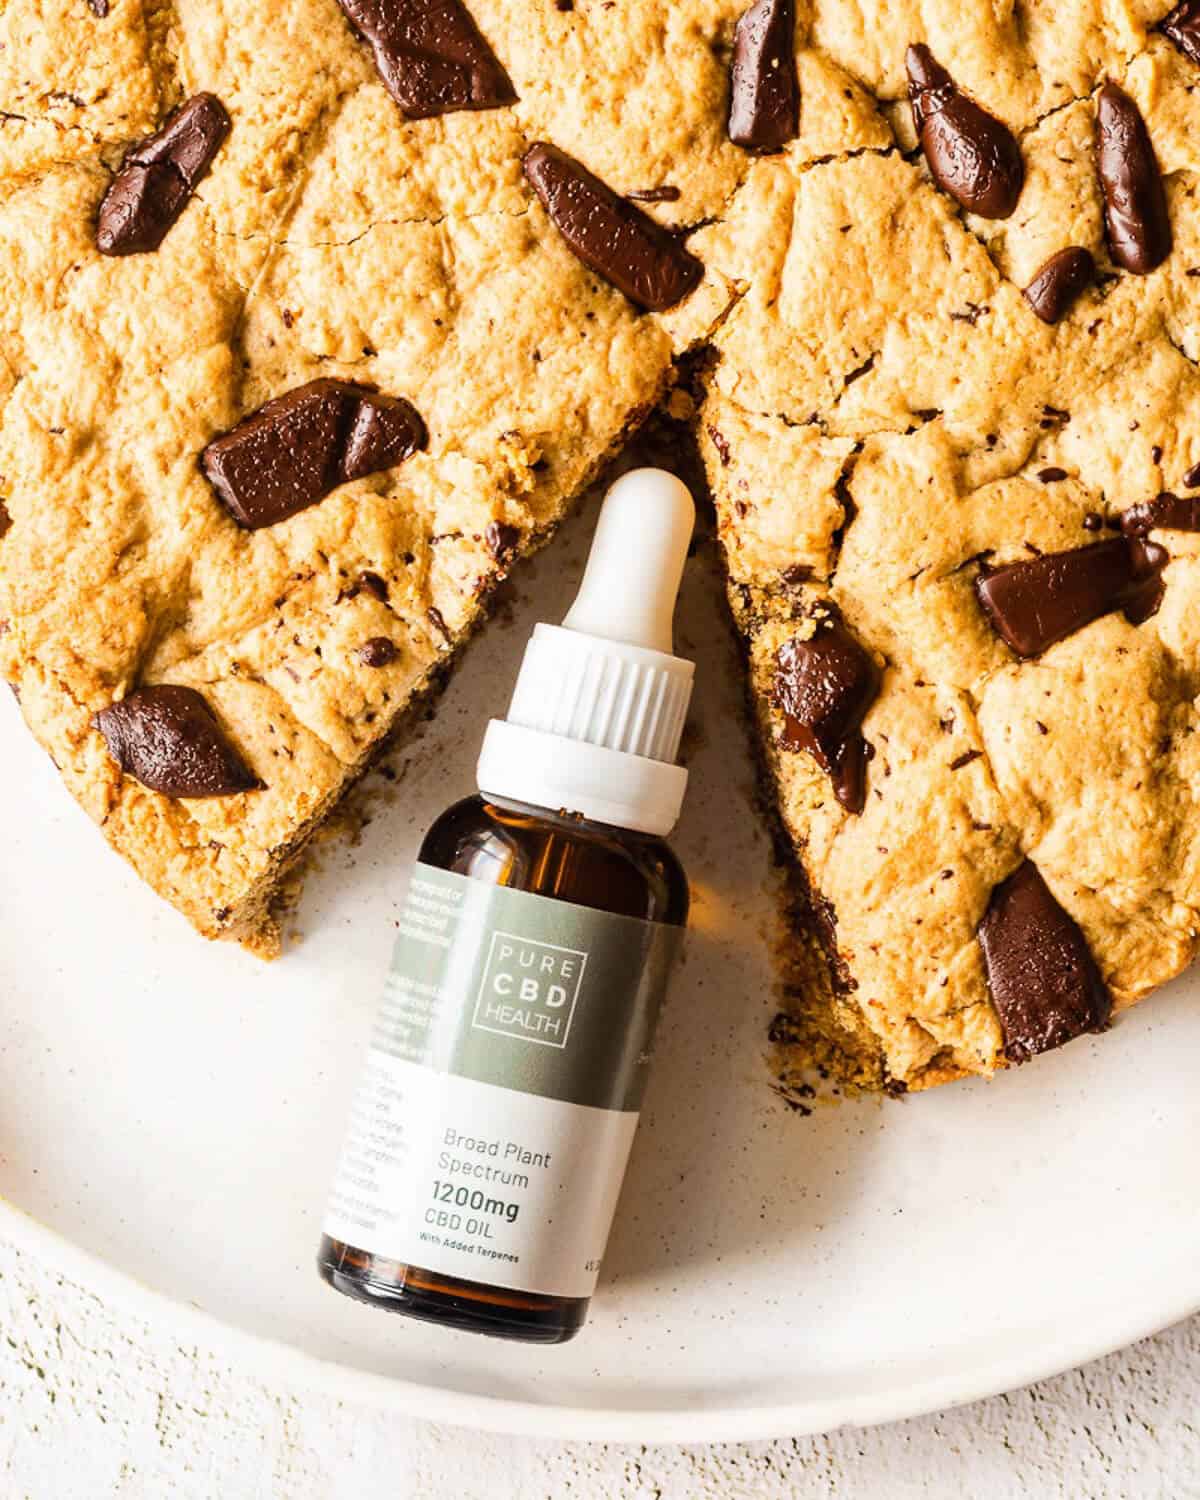 A Giant Chocolate Chip Cookie on a white plate, a slice is missing and in its place is a bottle of cbd oil.